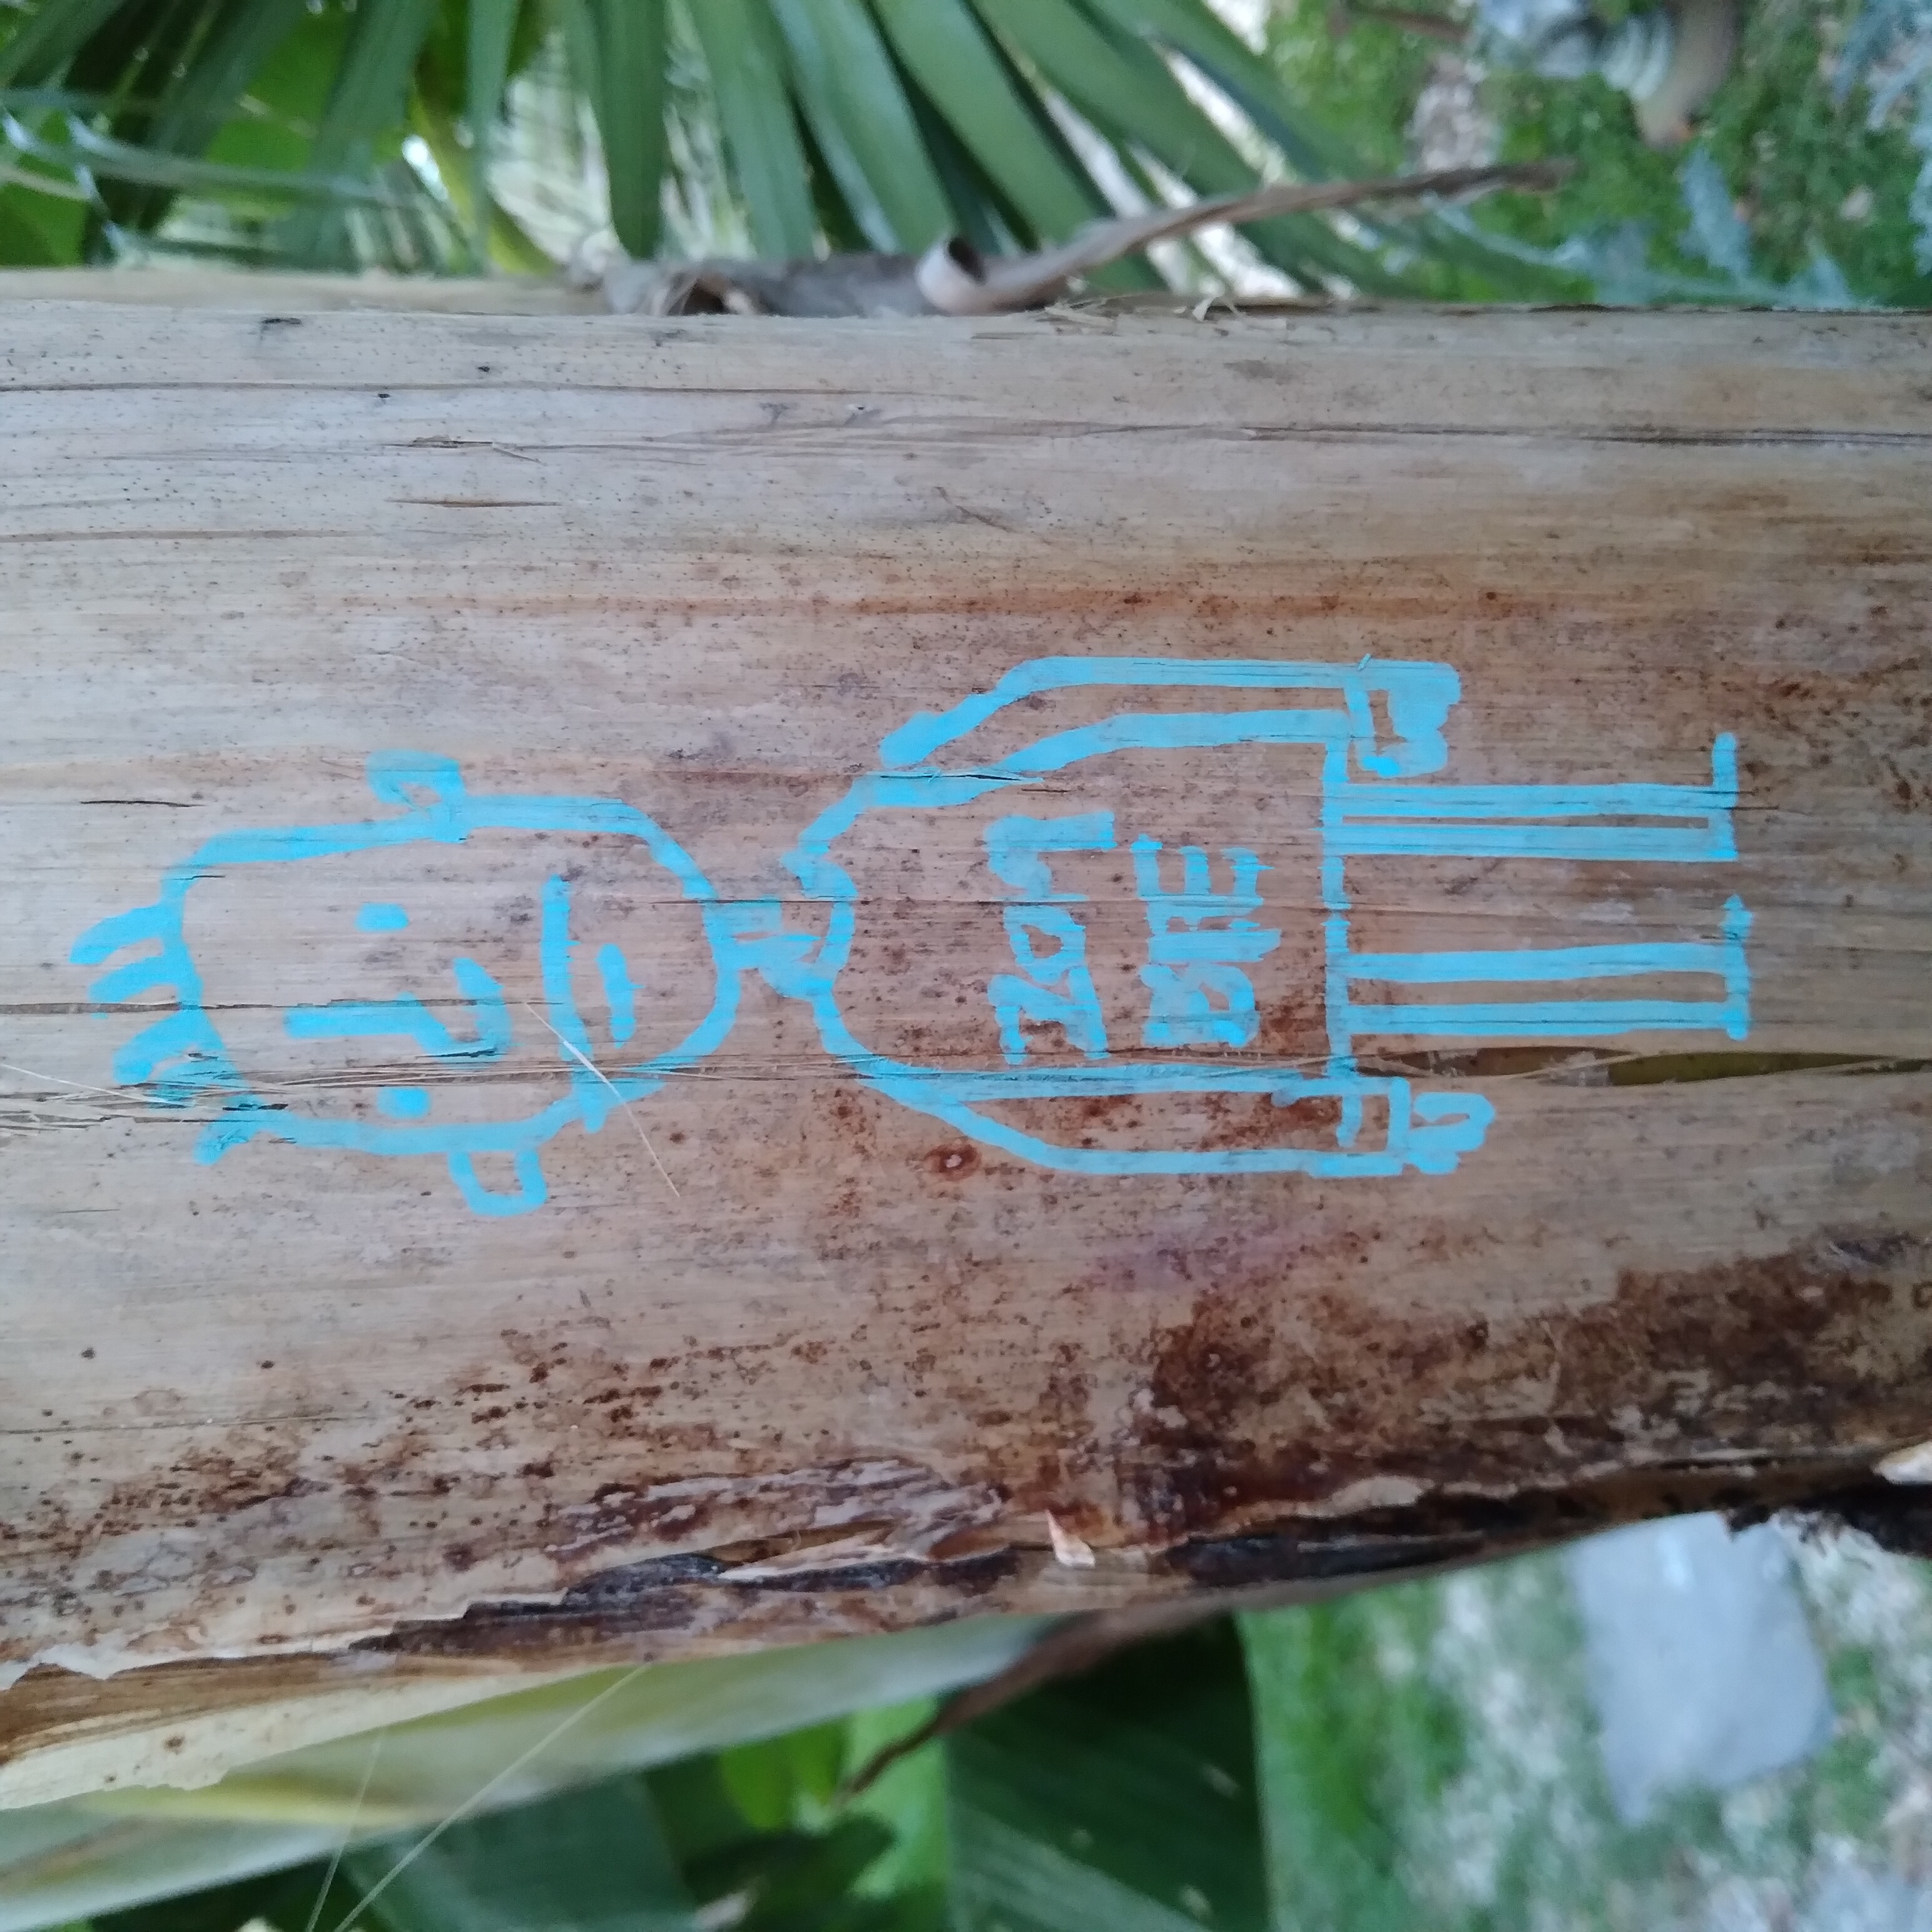 Doodle on a banana tree by David Rhoden, 2021.